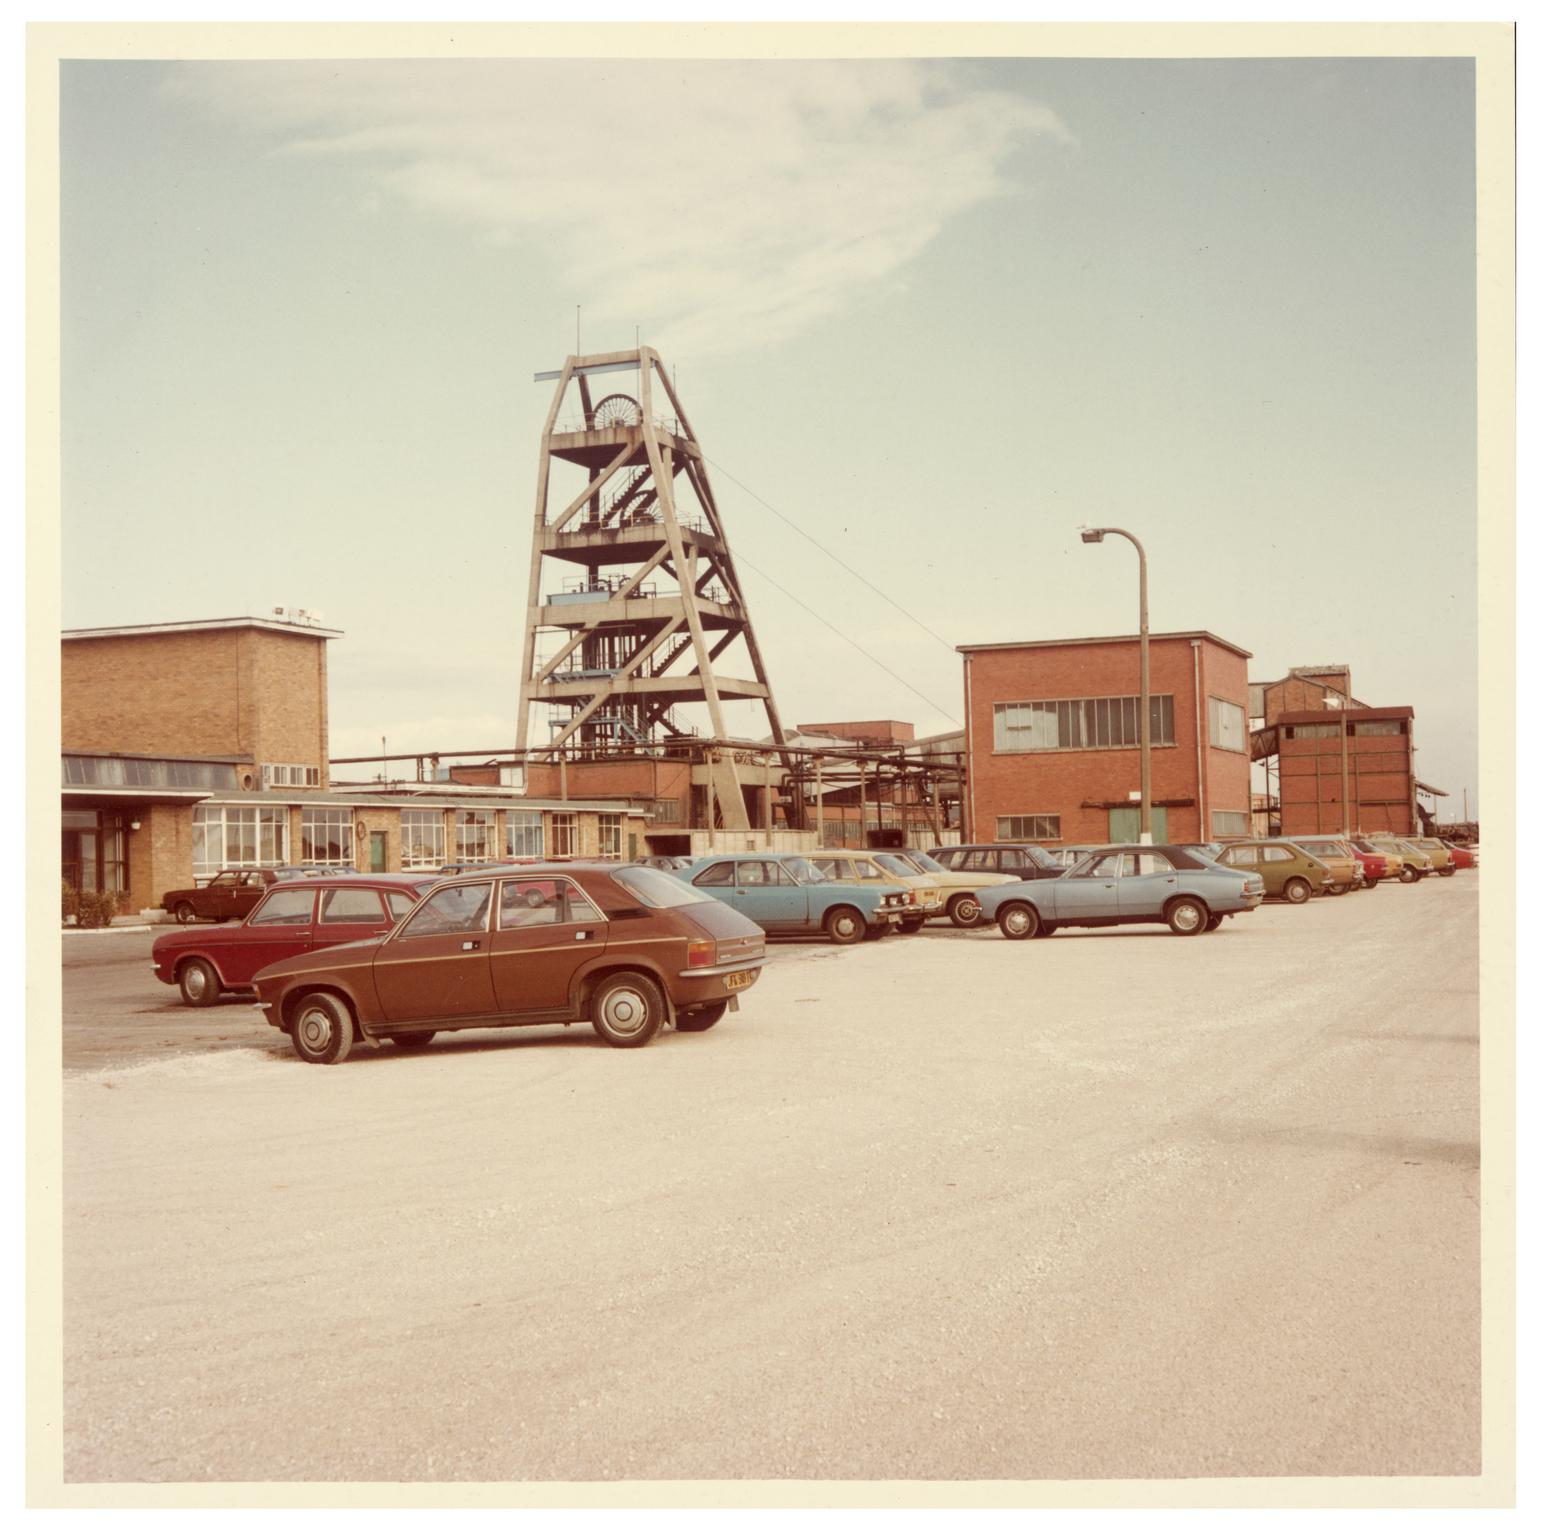 Point of Ayr Colliery, photograph